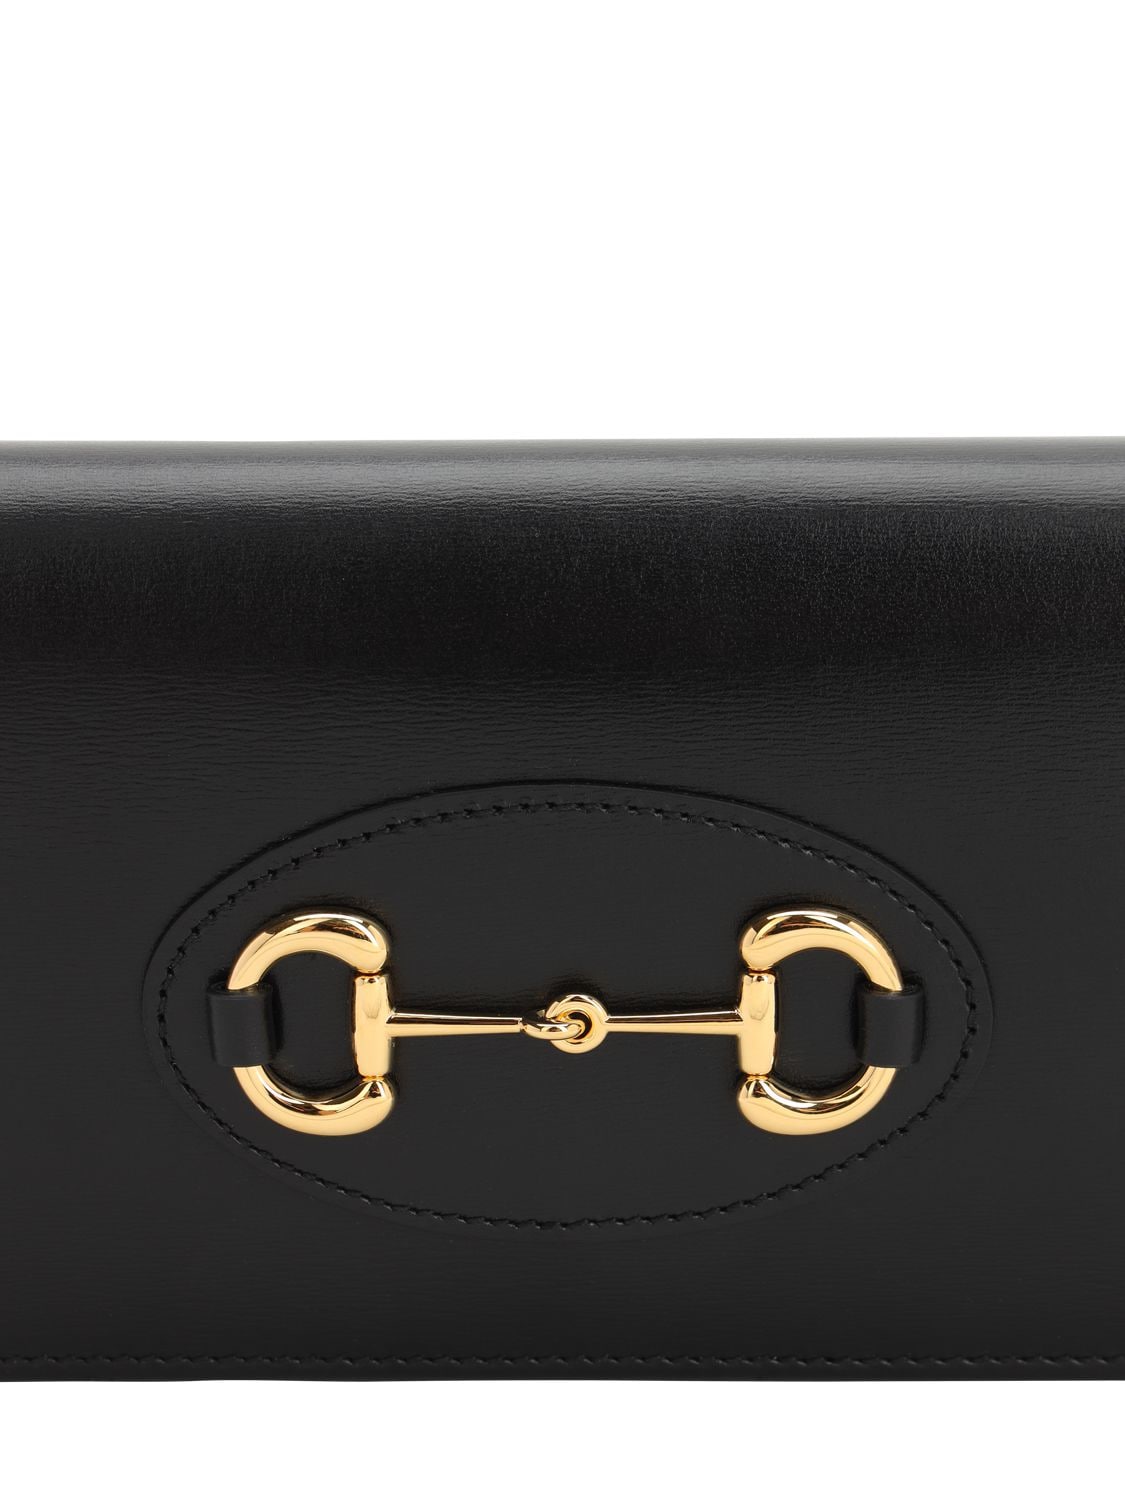 Gucci 1955 Horsebit Leather Wallet On A Chain In Black Leather | ModeSens